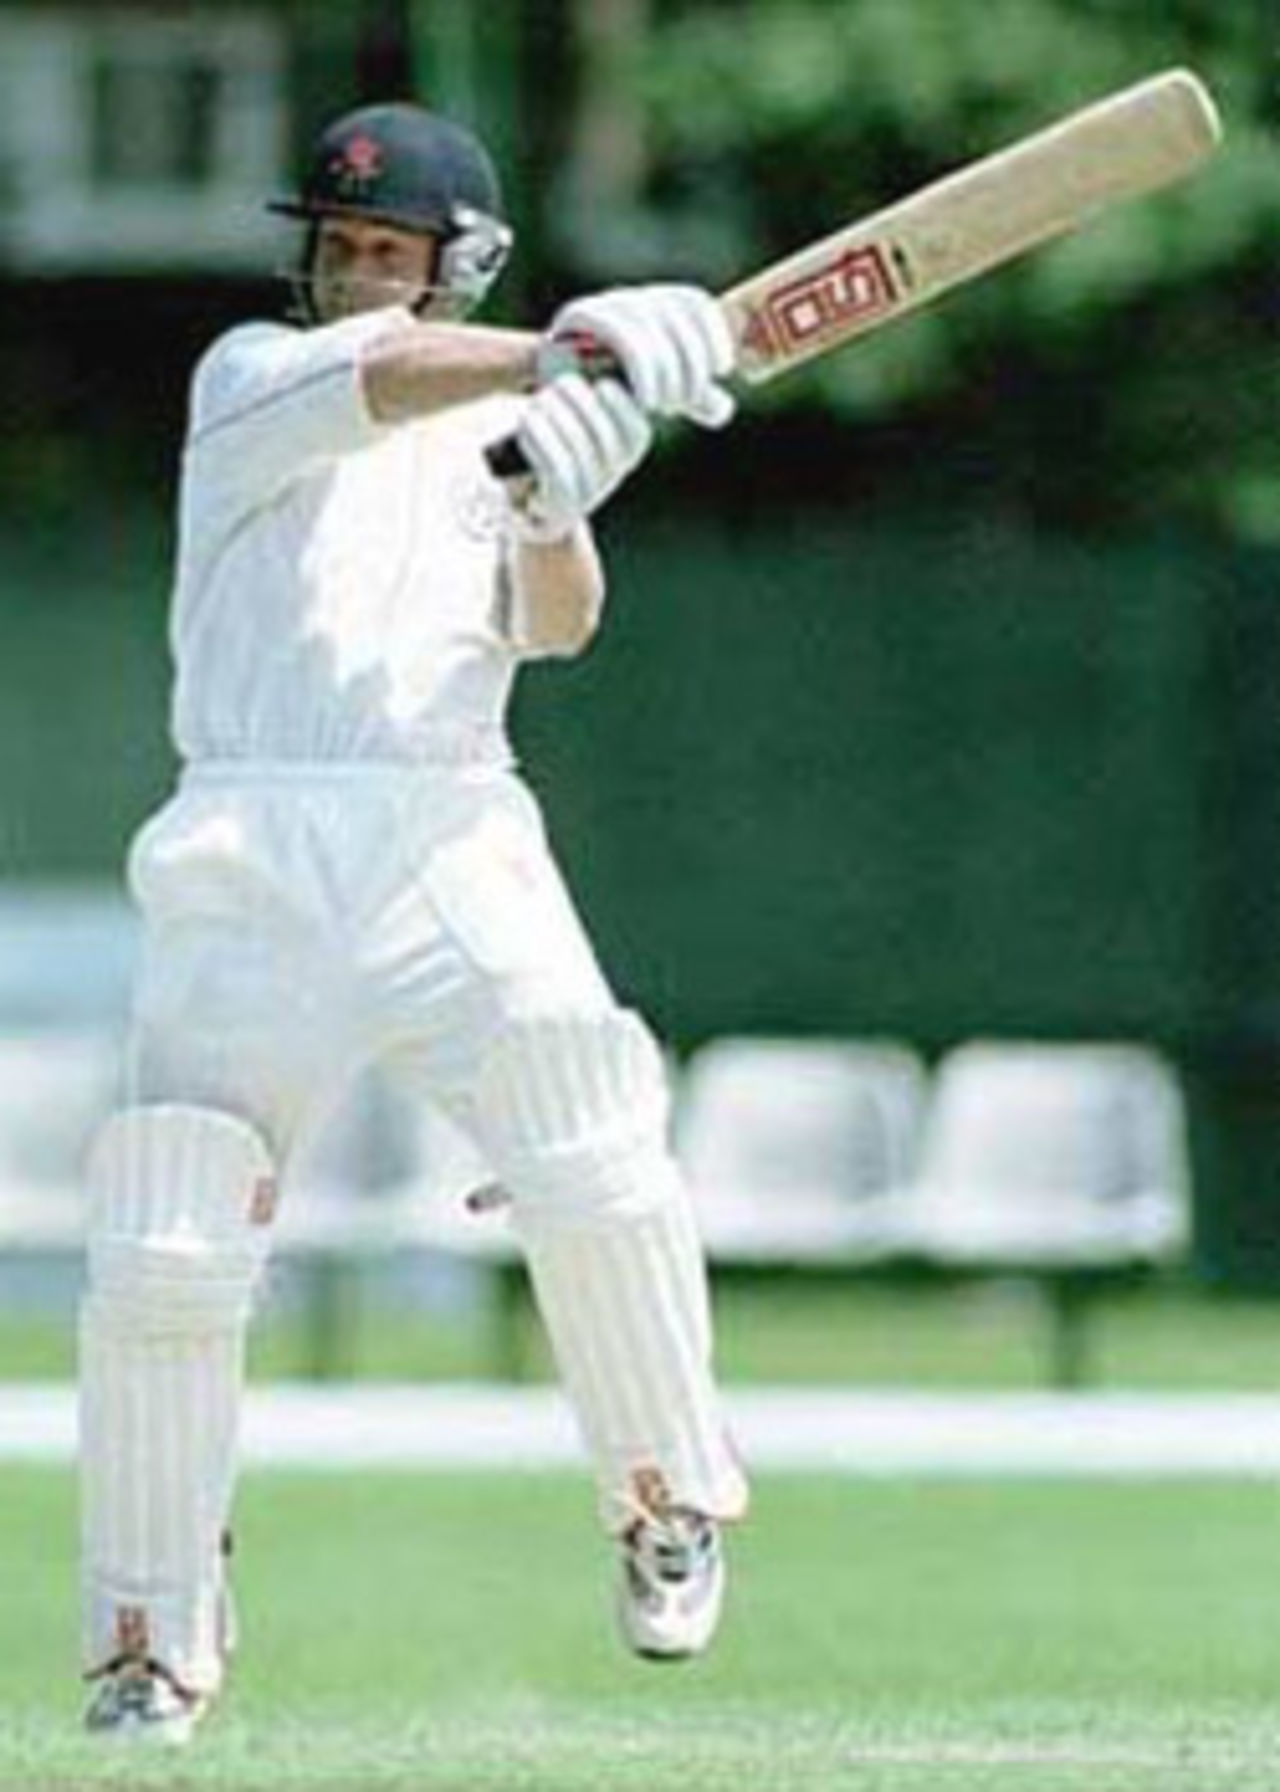 Graham Lloyd cuts the ball, New Zealand 'A' in England, 2000, Lancashire v New Zealand 'A', Aigburth, Liverpool, 13-16 June 2000(Day 4).